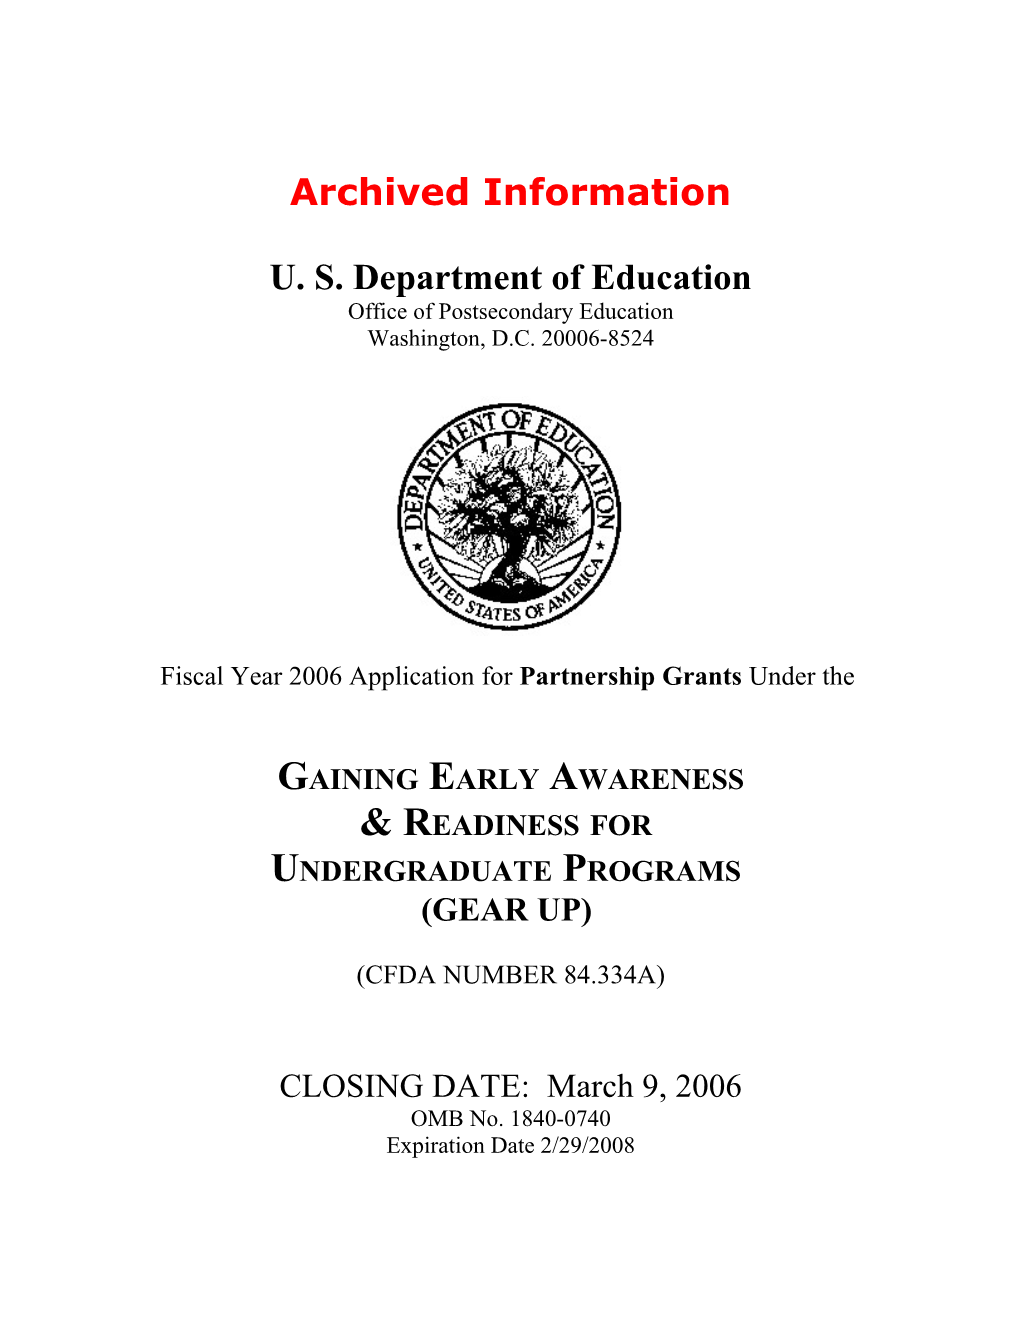 Archived: FY06 Application for Partnership Grants Under the GEARUP Program (Msword)